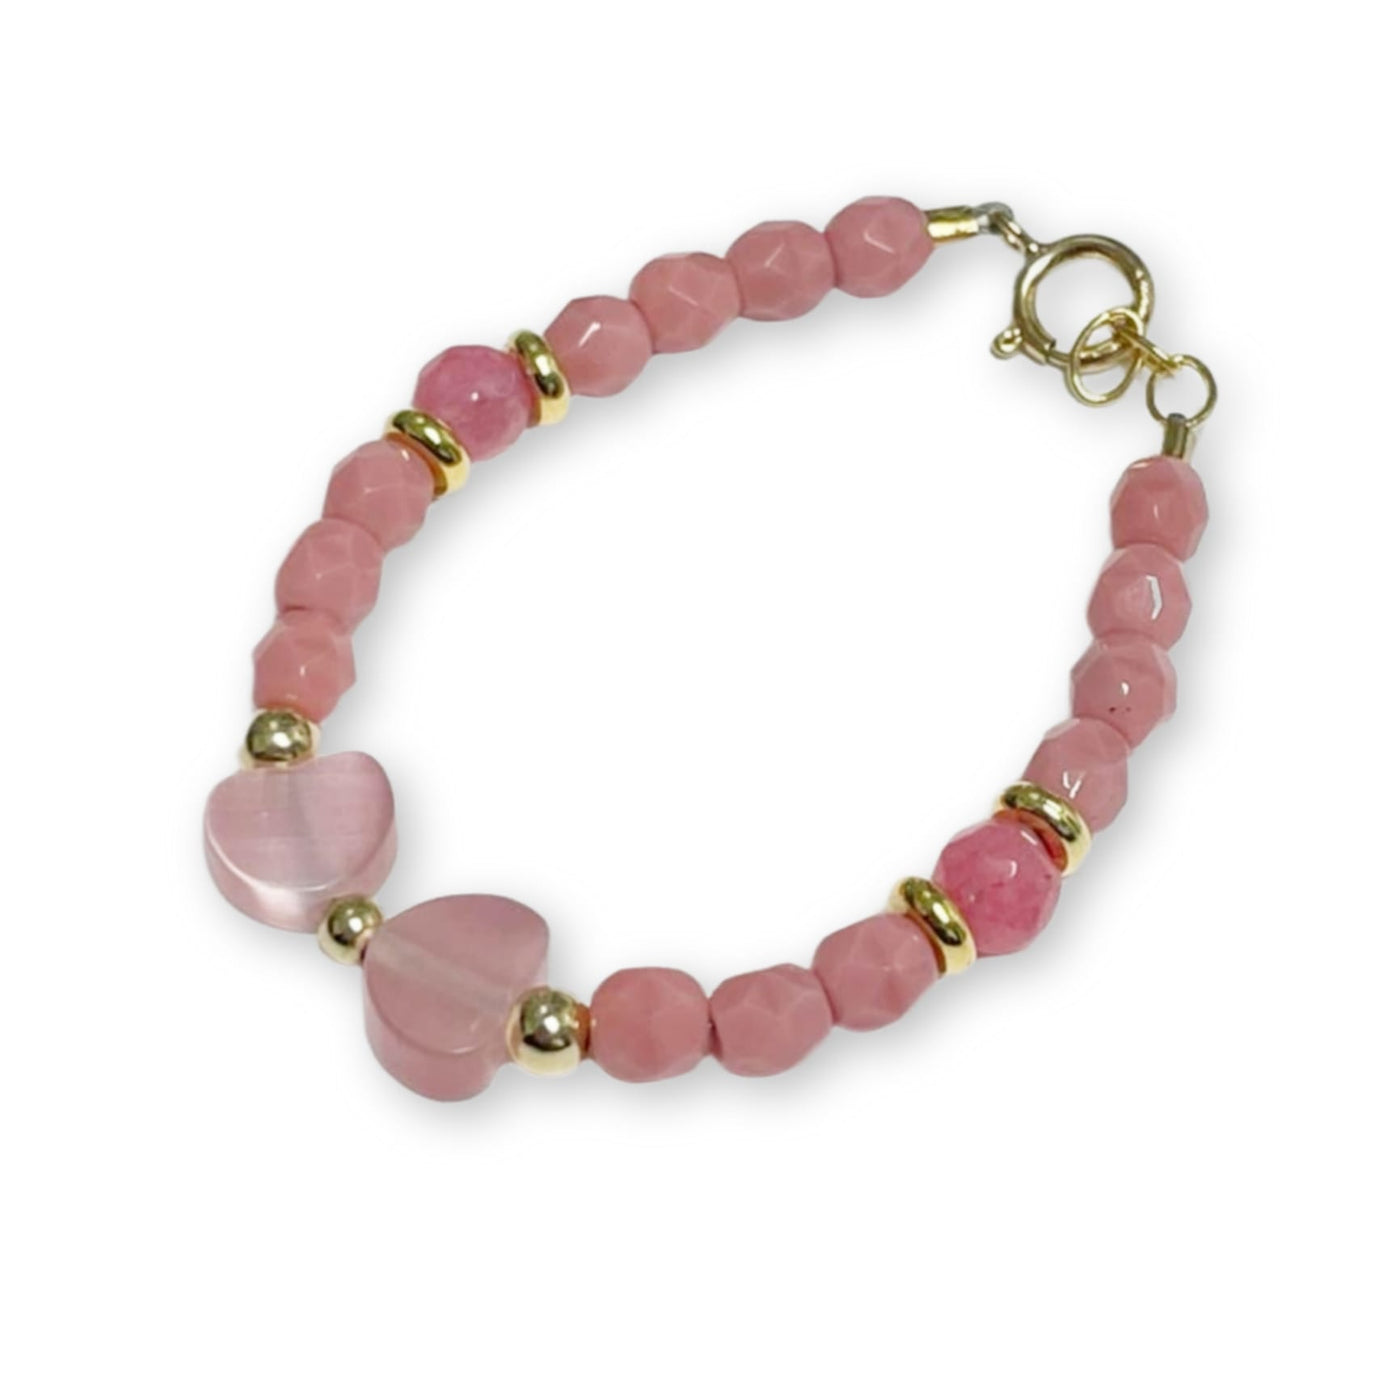 My Little Jewel Pink Coral Beads with Bow Bracelet